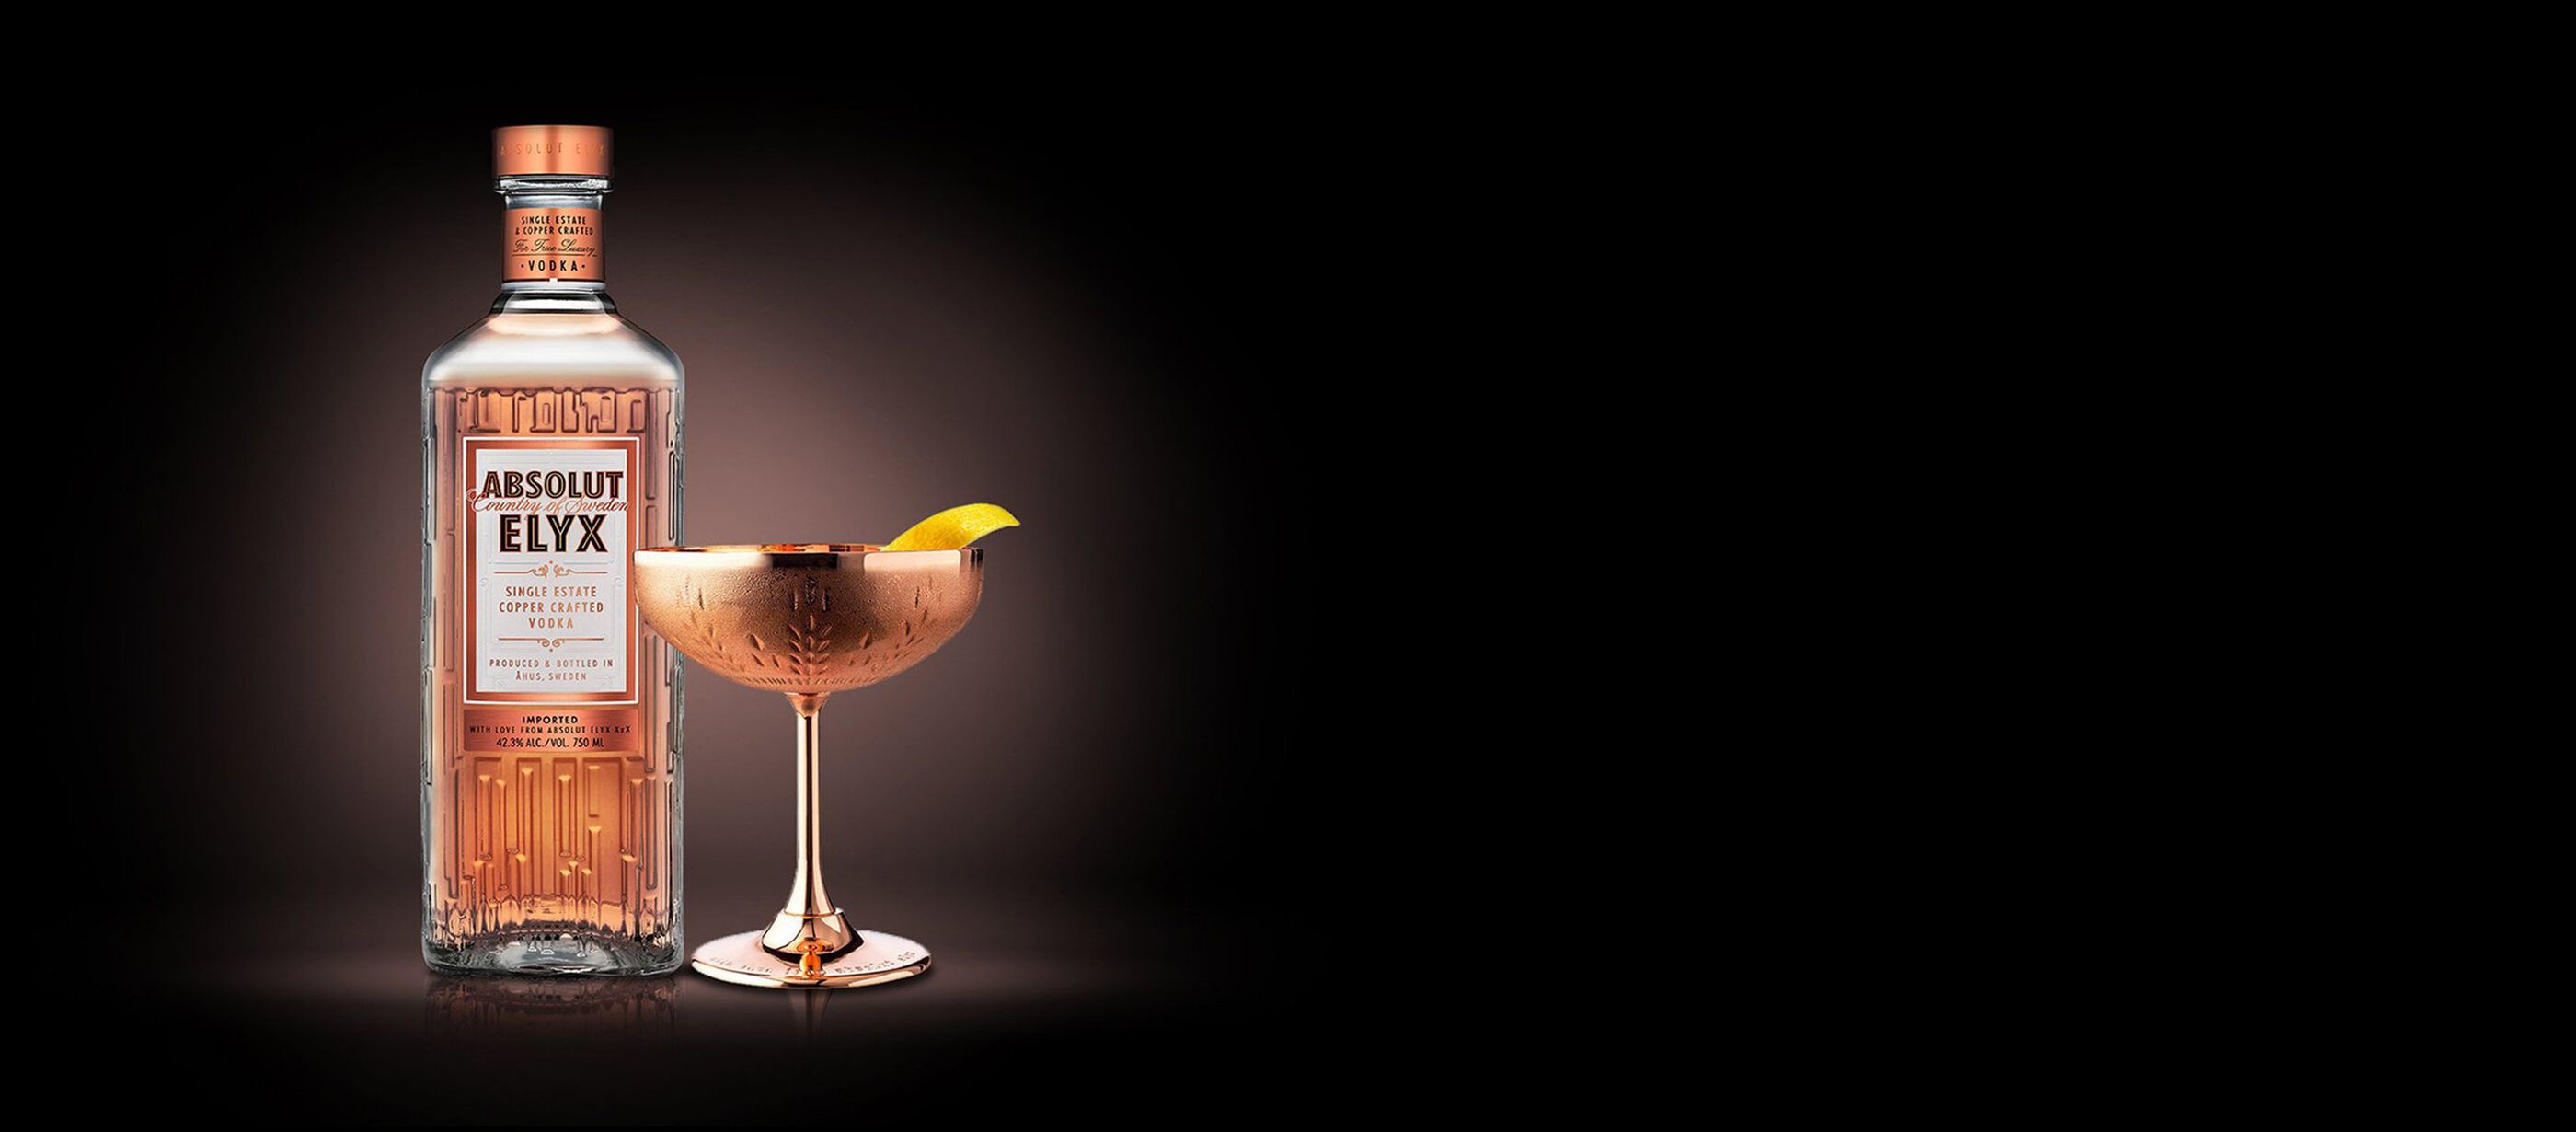 The Absolut Elyx Martini Cocktail